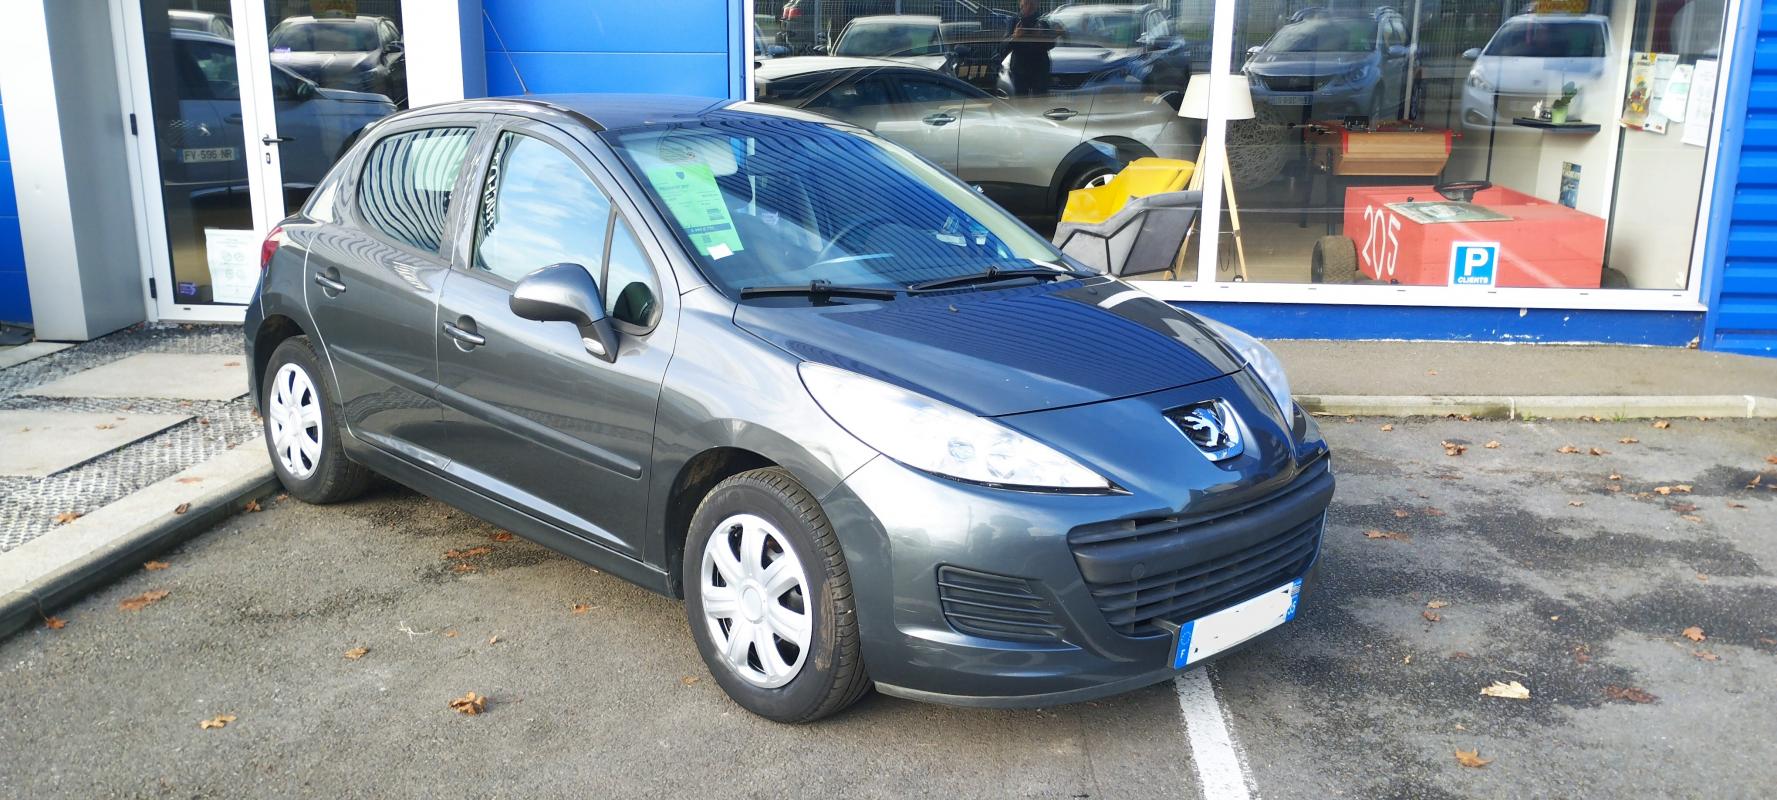 Peugeot 207 1.4 HDI ACTIVE TRENDY BVM5